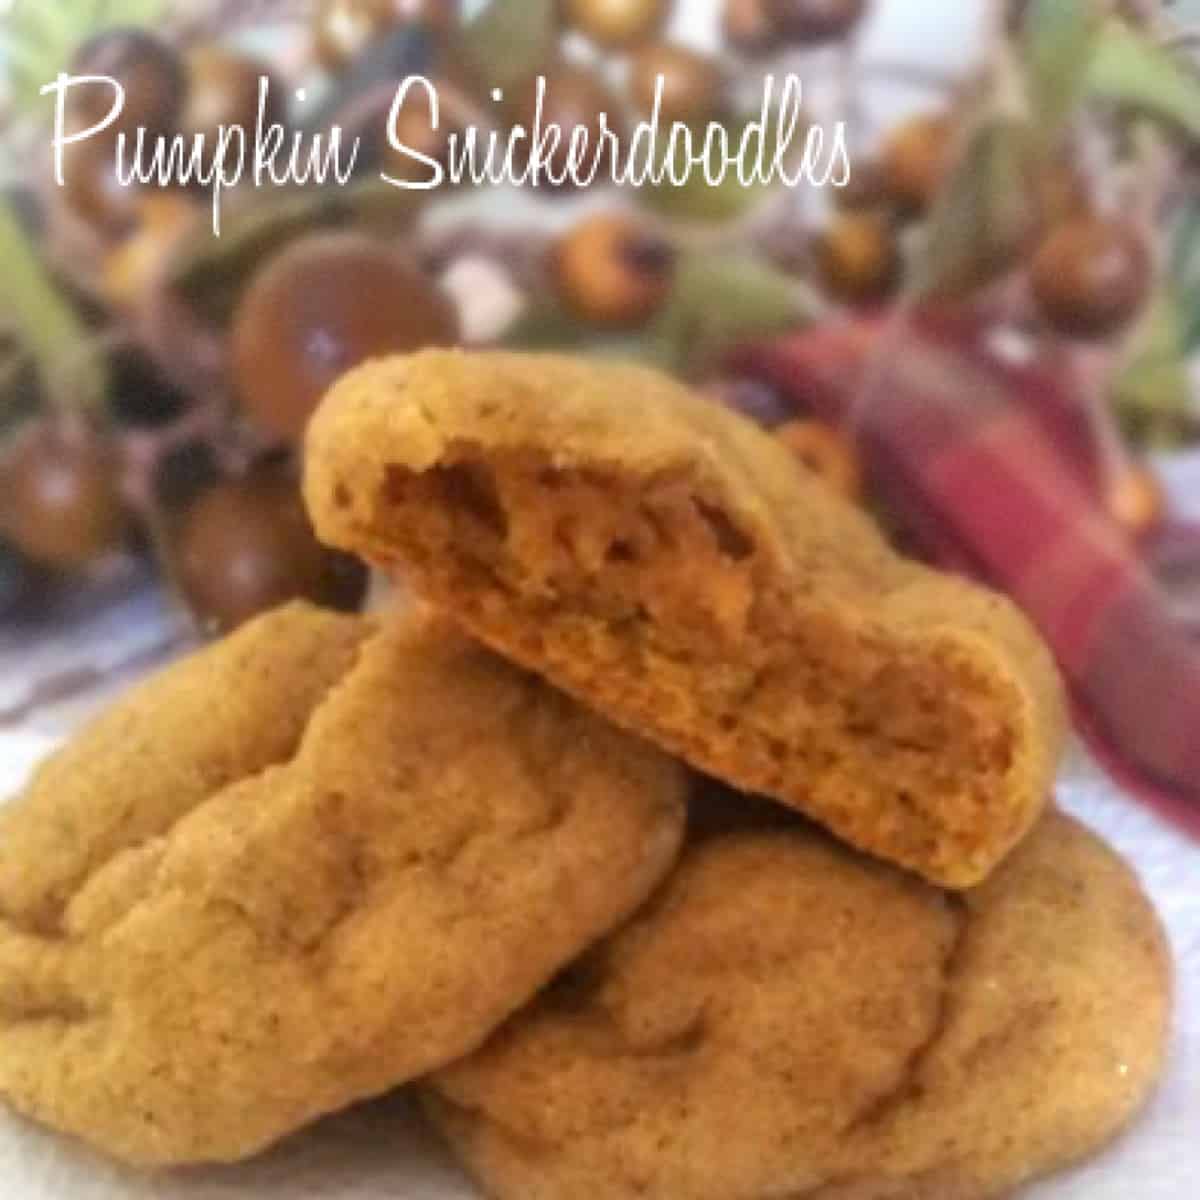  A plate of pumpkin snickerdoodles. The cookies are round and golden brown, with a crackly cinnamon sugar topping. A few of the cookies are broken in half, revealing a soft and chewy interior.